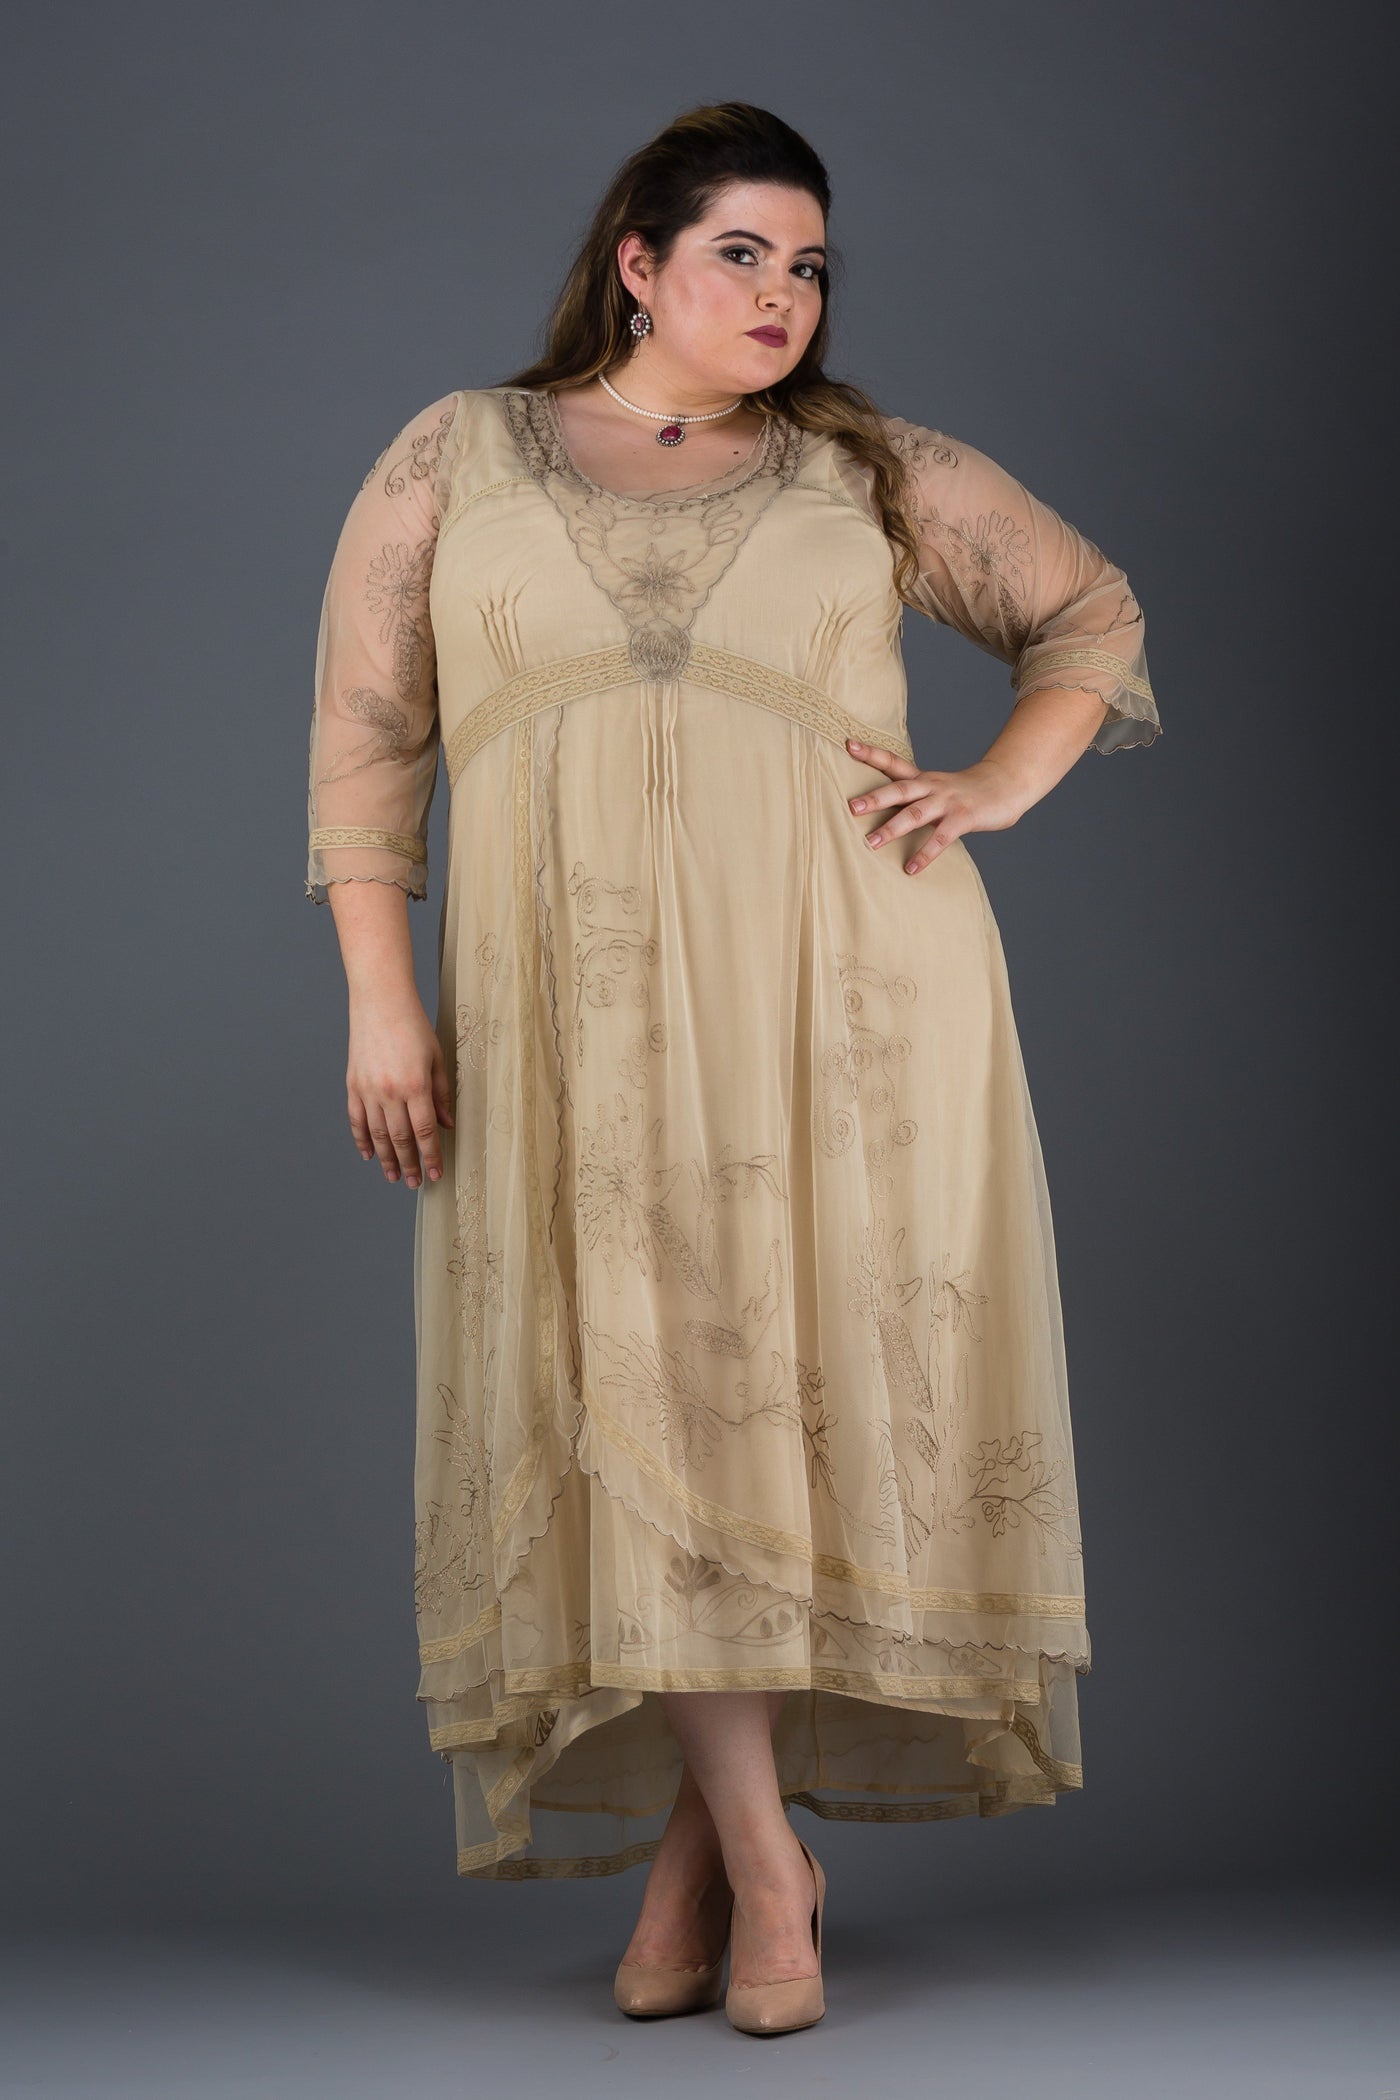 Plus SIze Downton Abbey Gown in Pearl by Nataya